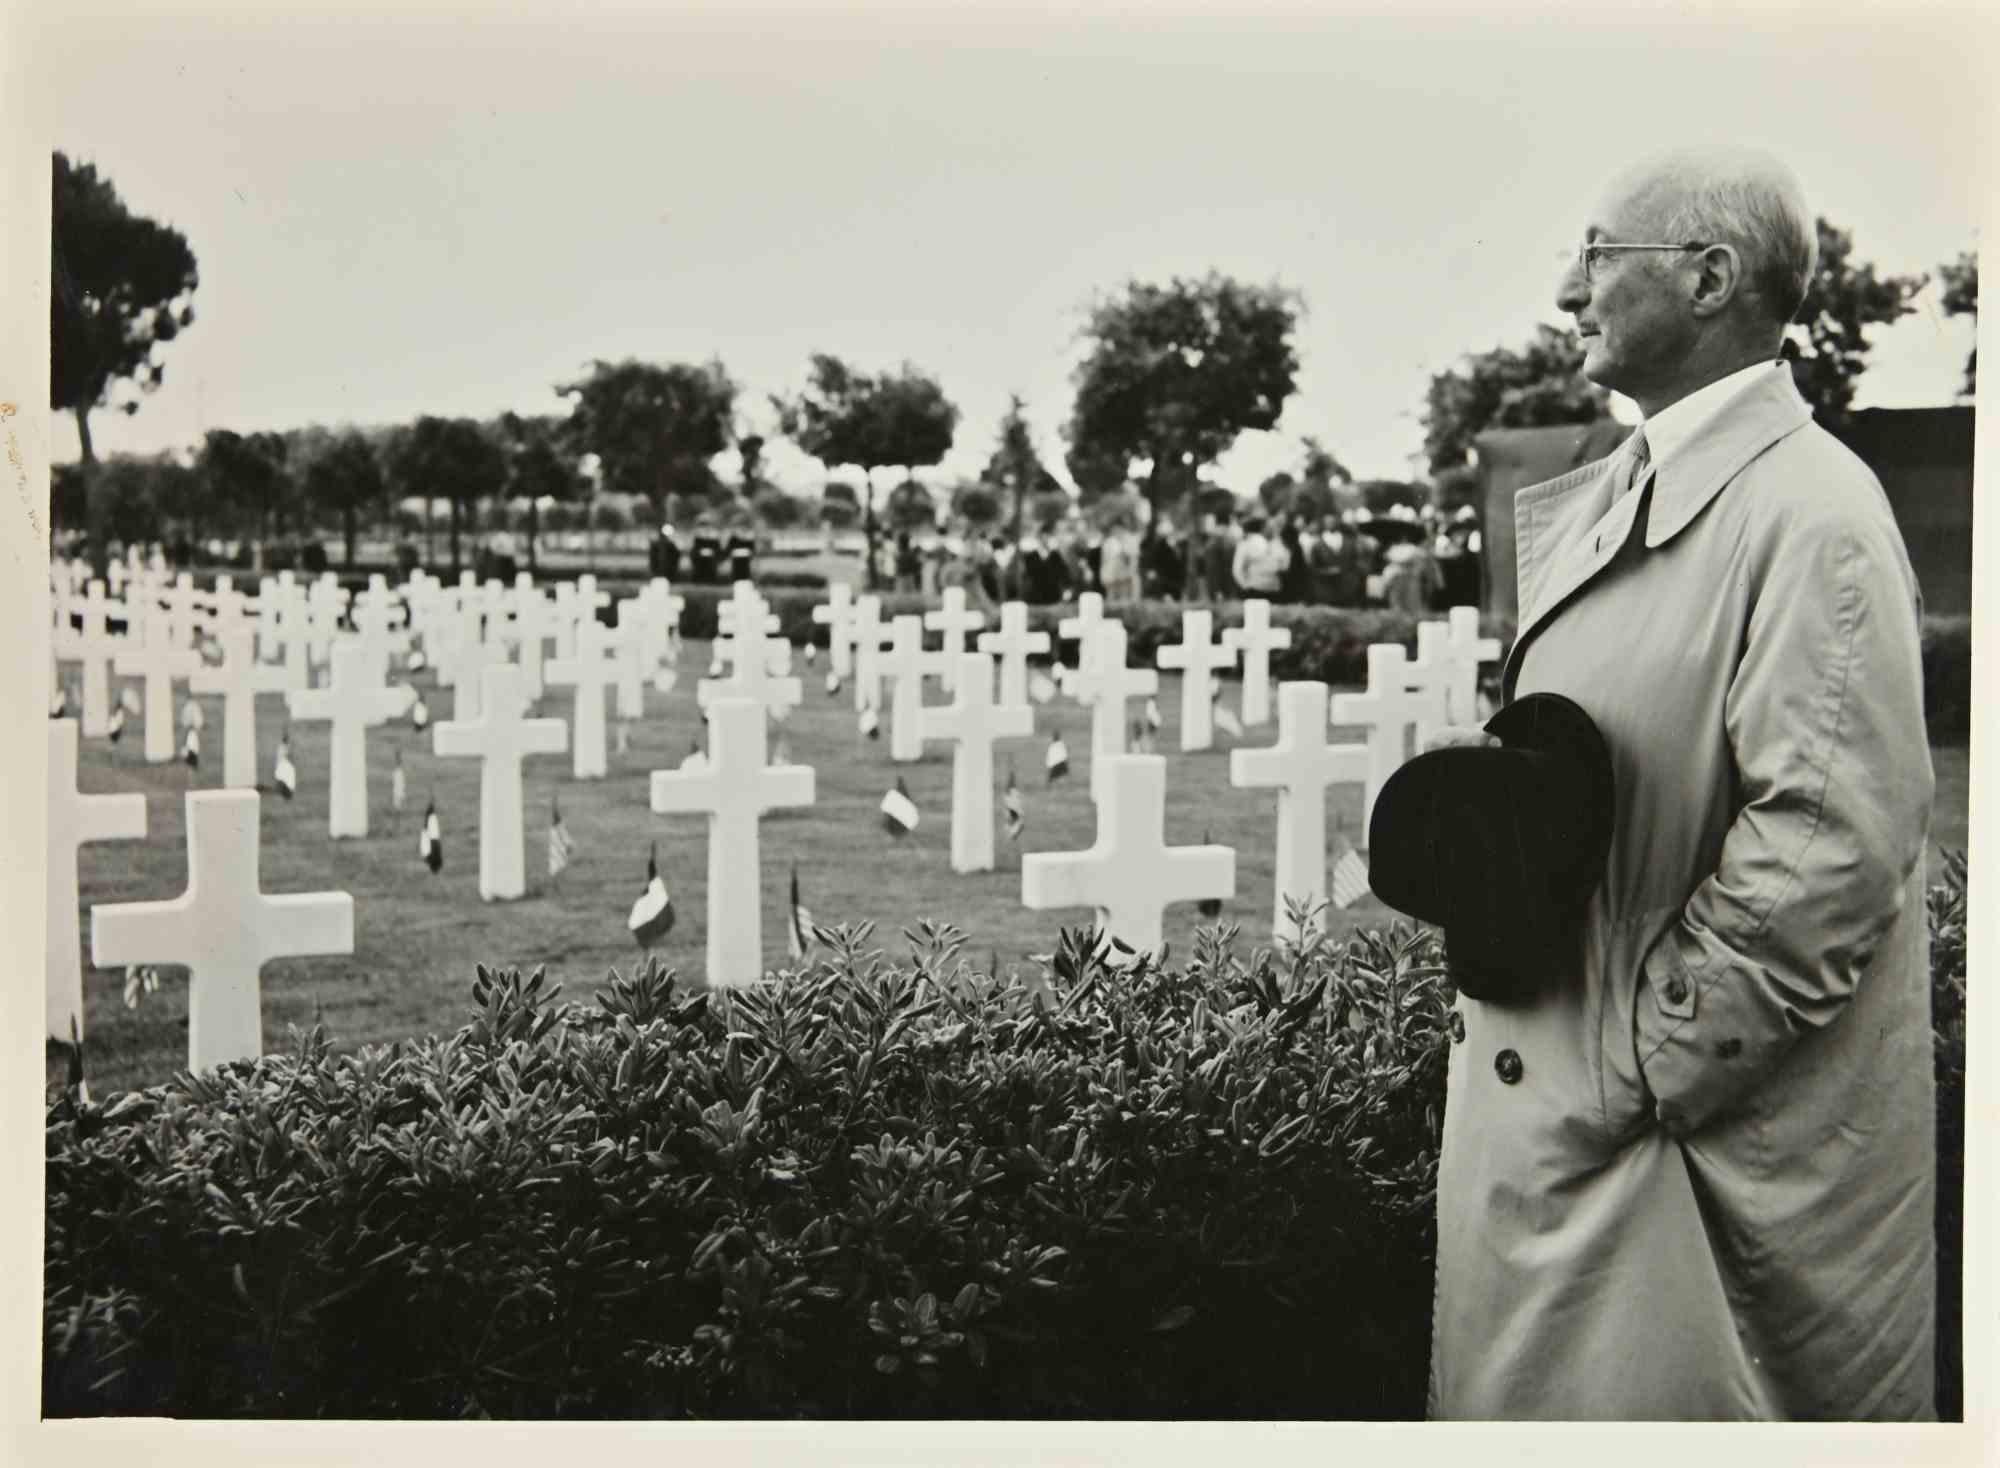 Unknown Figurative Photograph - War Cemetary - Vintage Photograph - 1950s